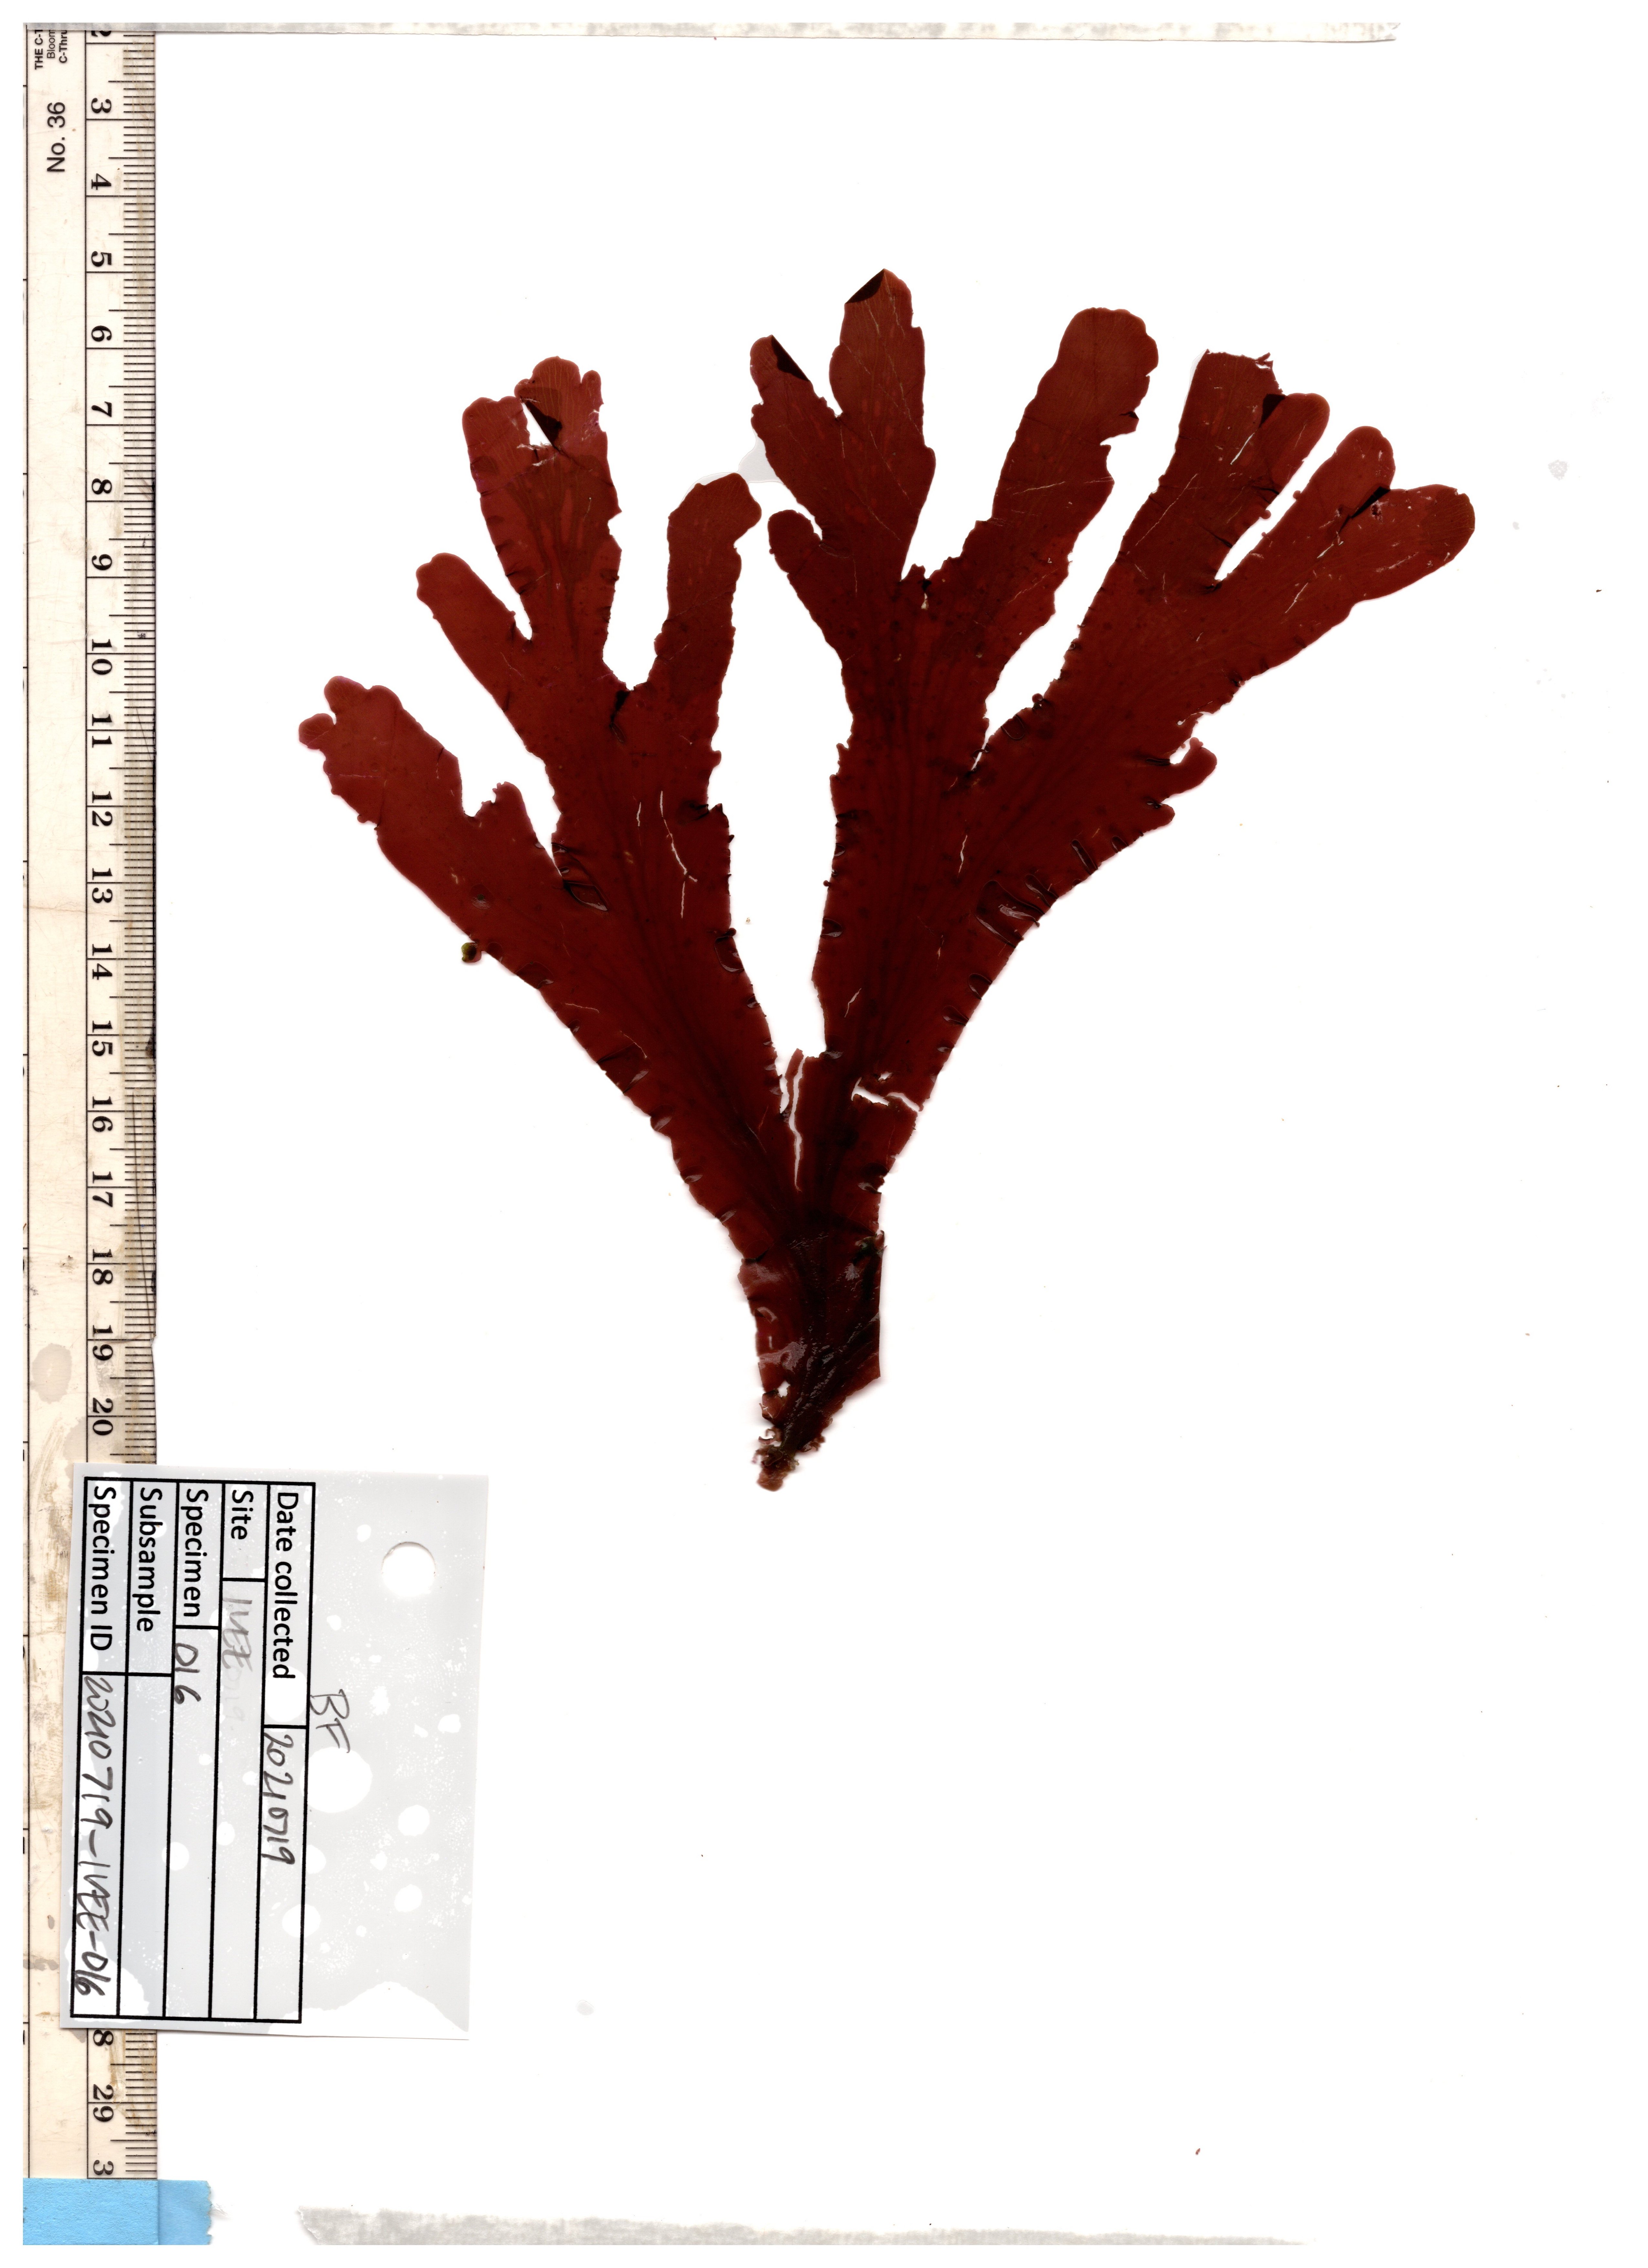 Scan of Cryptopleura ruprechtiana, a marine macroalgae, on a white background. There is a ruler on the left for scale, and the sample tag is in the bottom left corner.